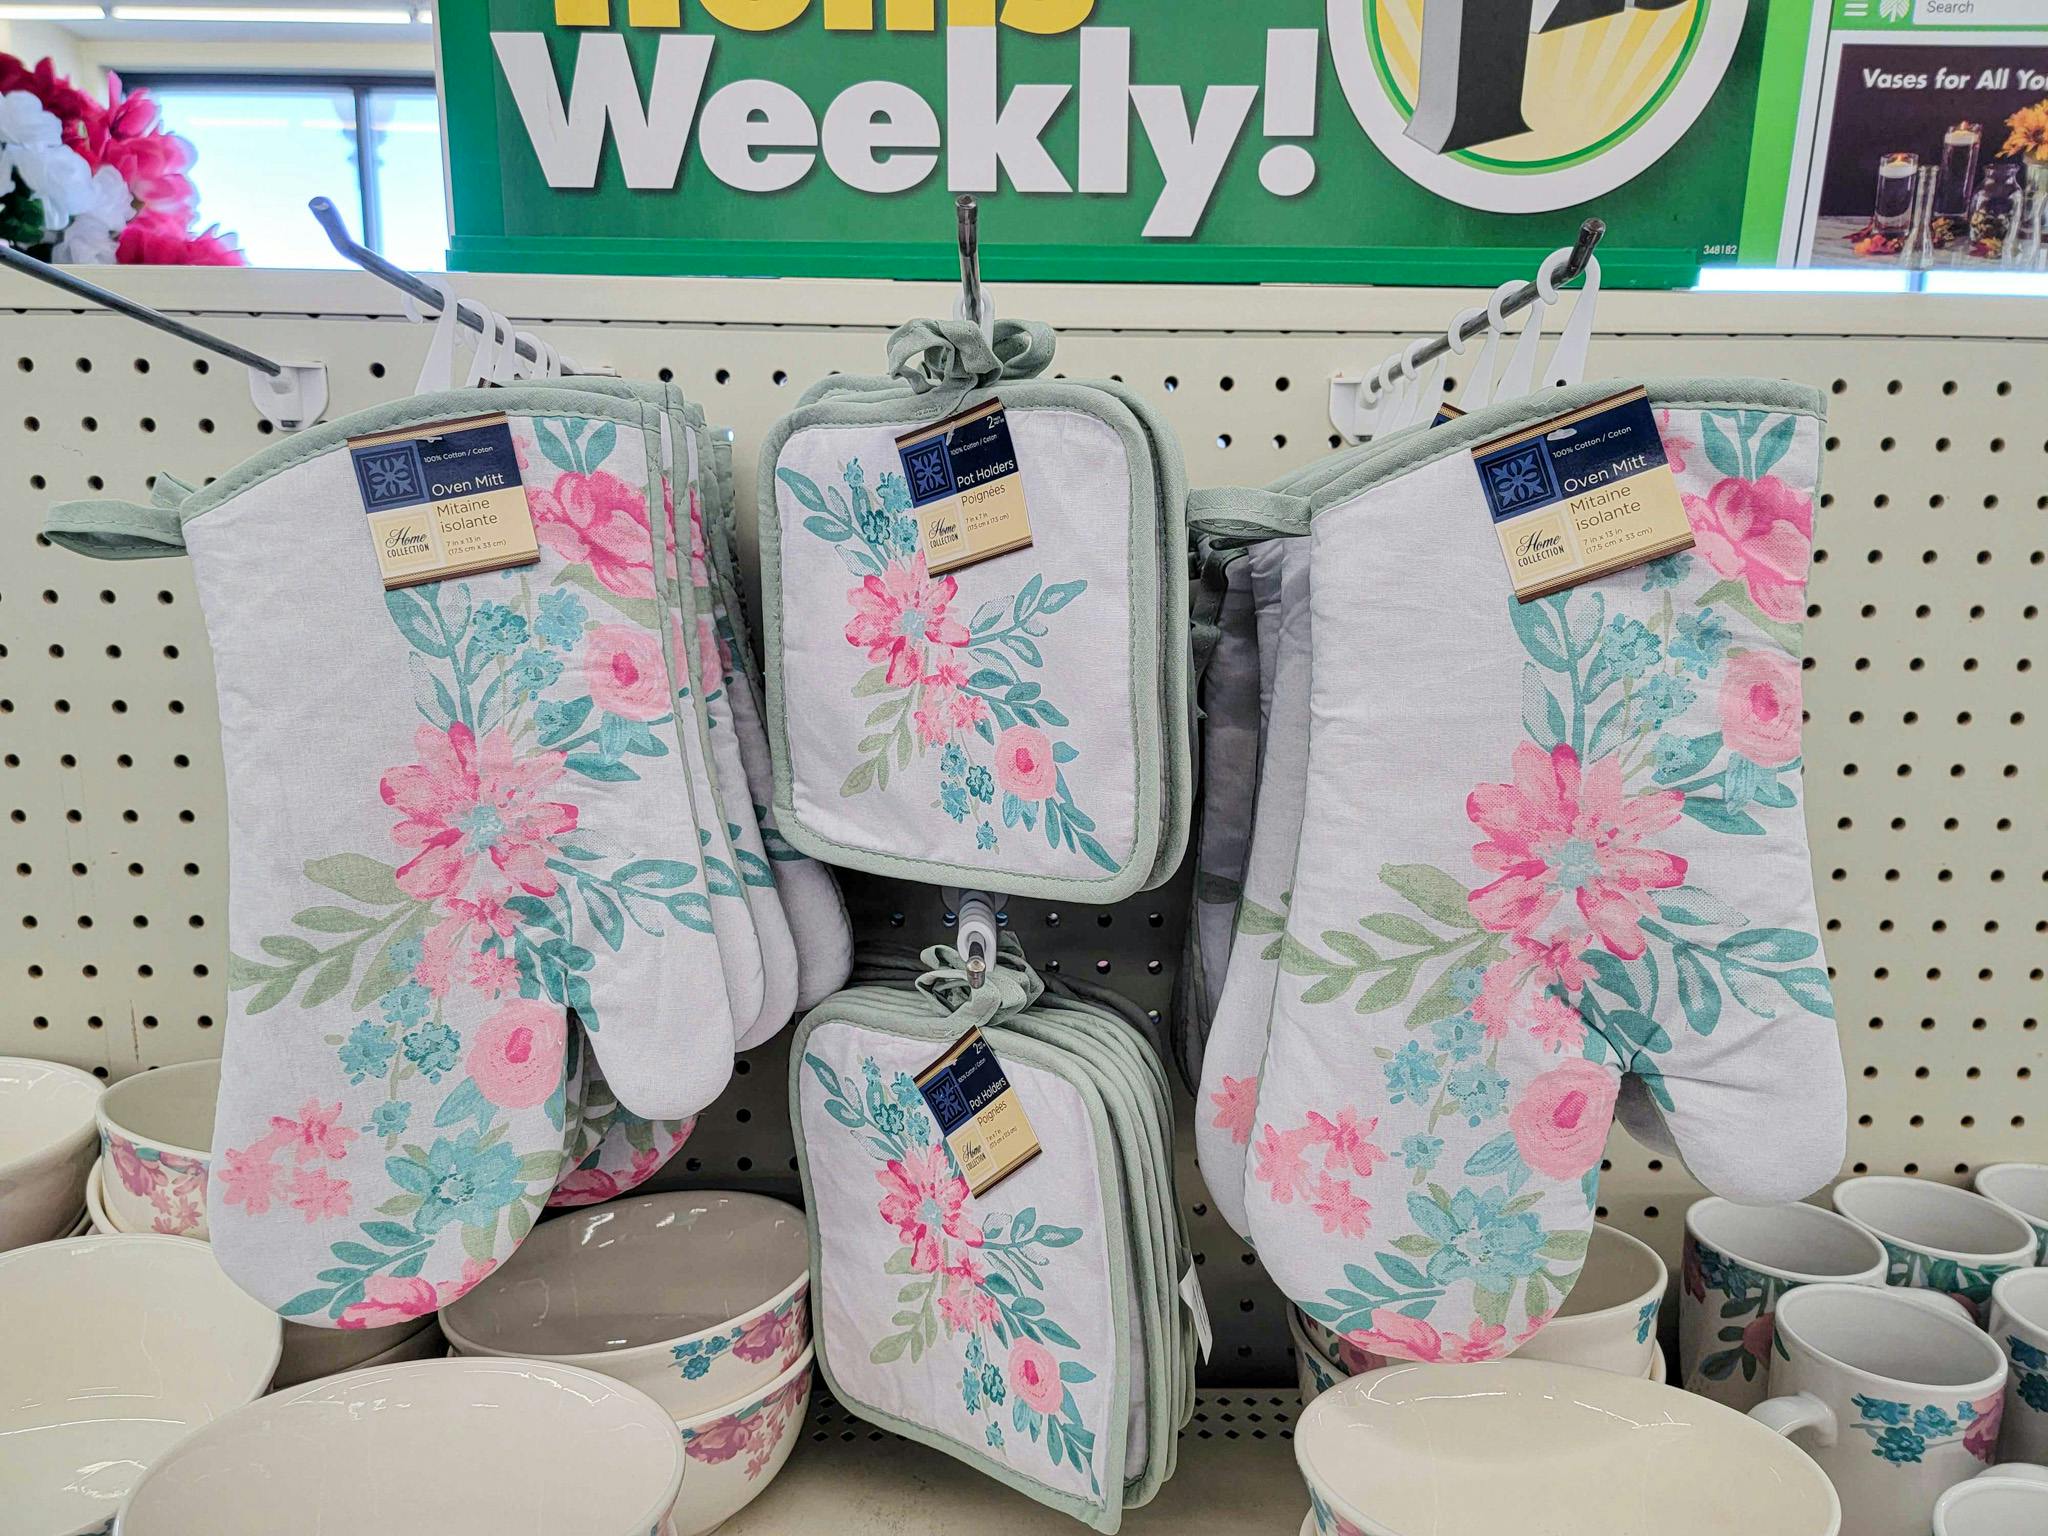 floral printed pot holders and oven mitts